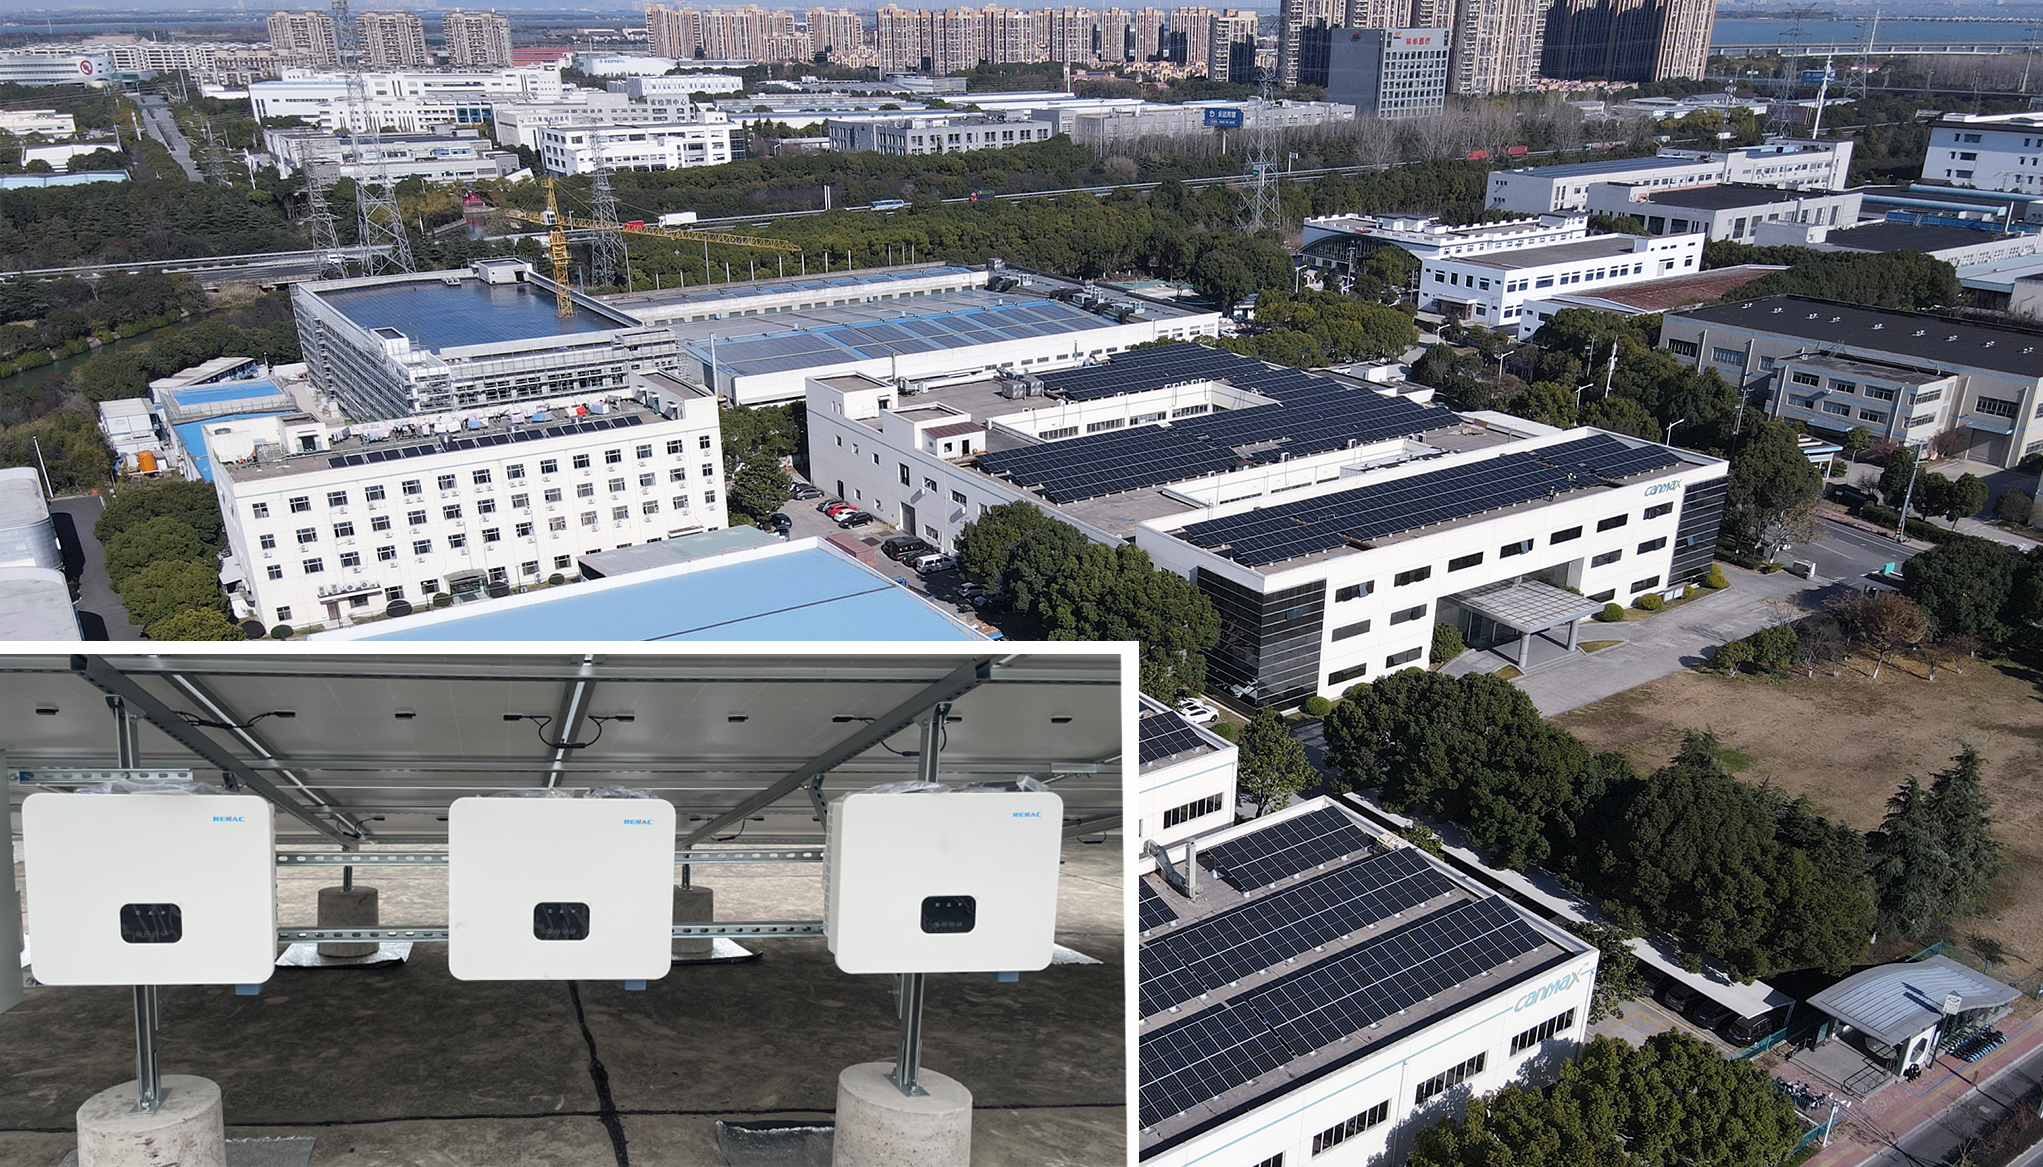 A new RENAC self-invested 1MW commercial on-grid PV plant was commissioned successfully in Suzhou, China!